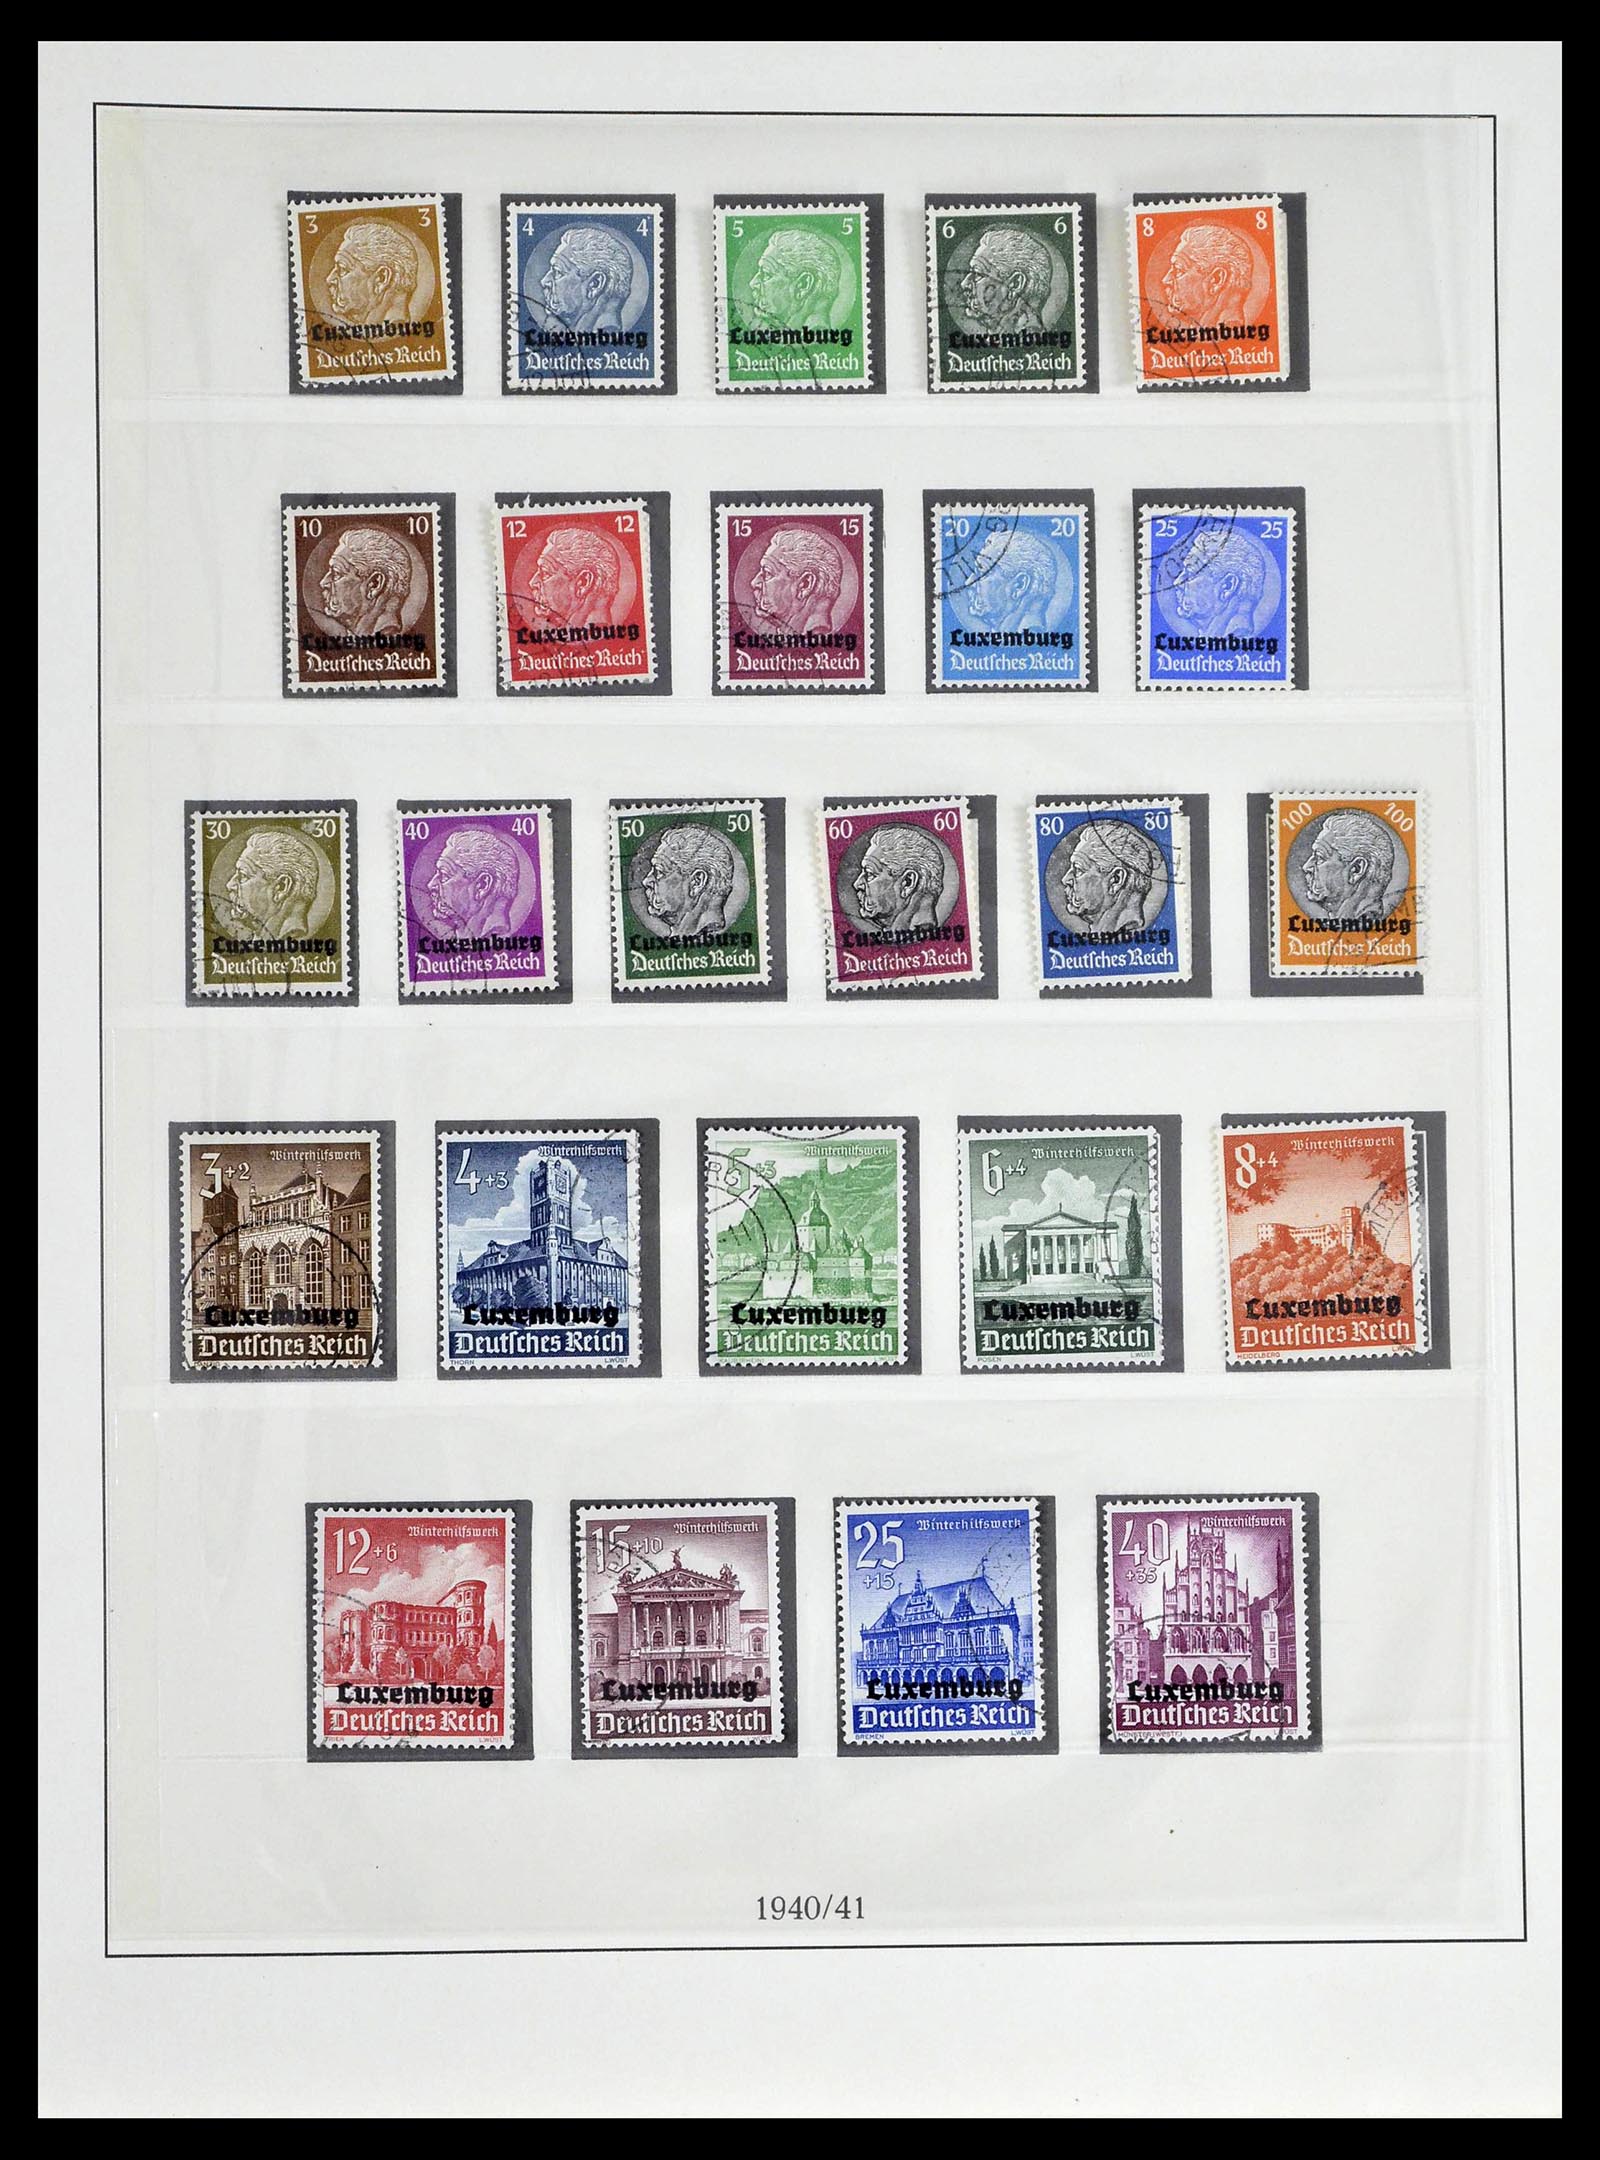 39396 0033 - Stamp collection 39396 German occupation WW II 1939-1945.